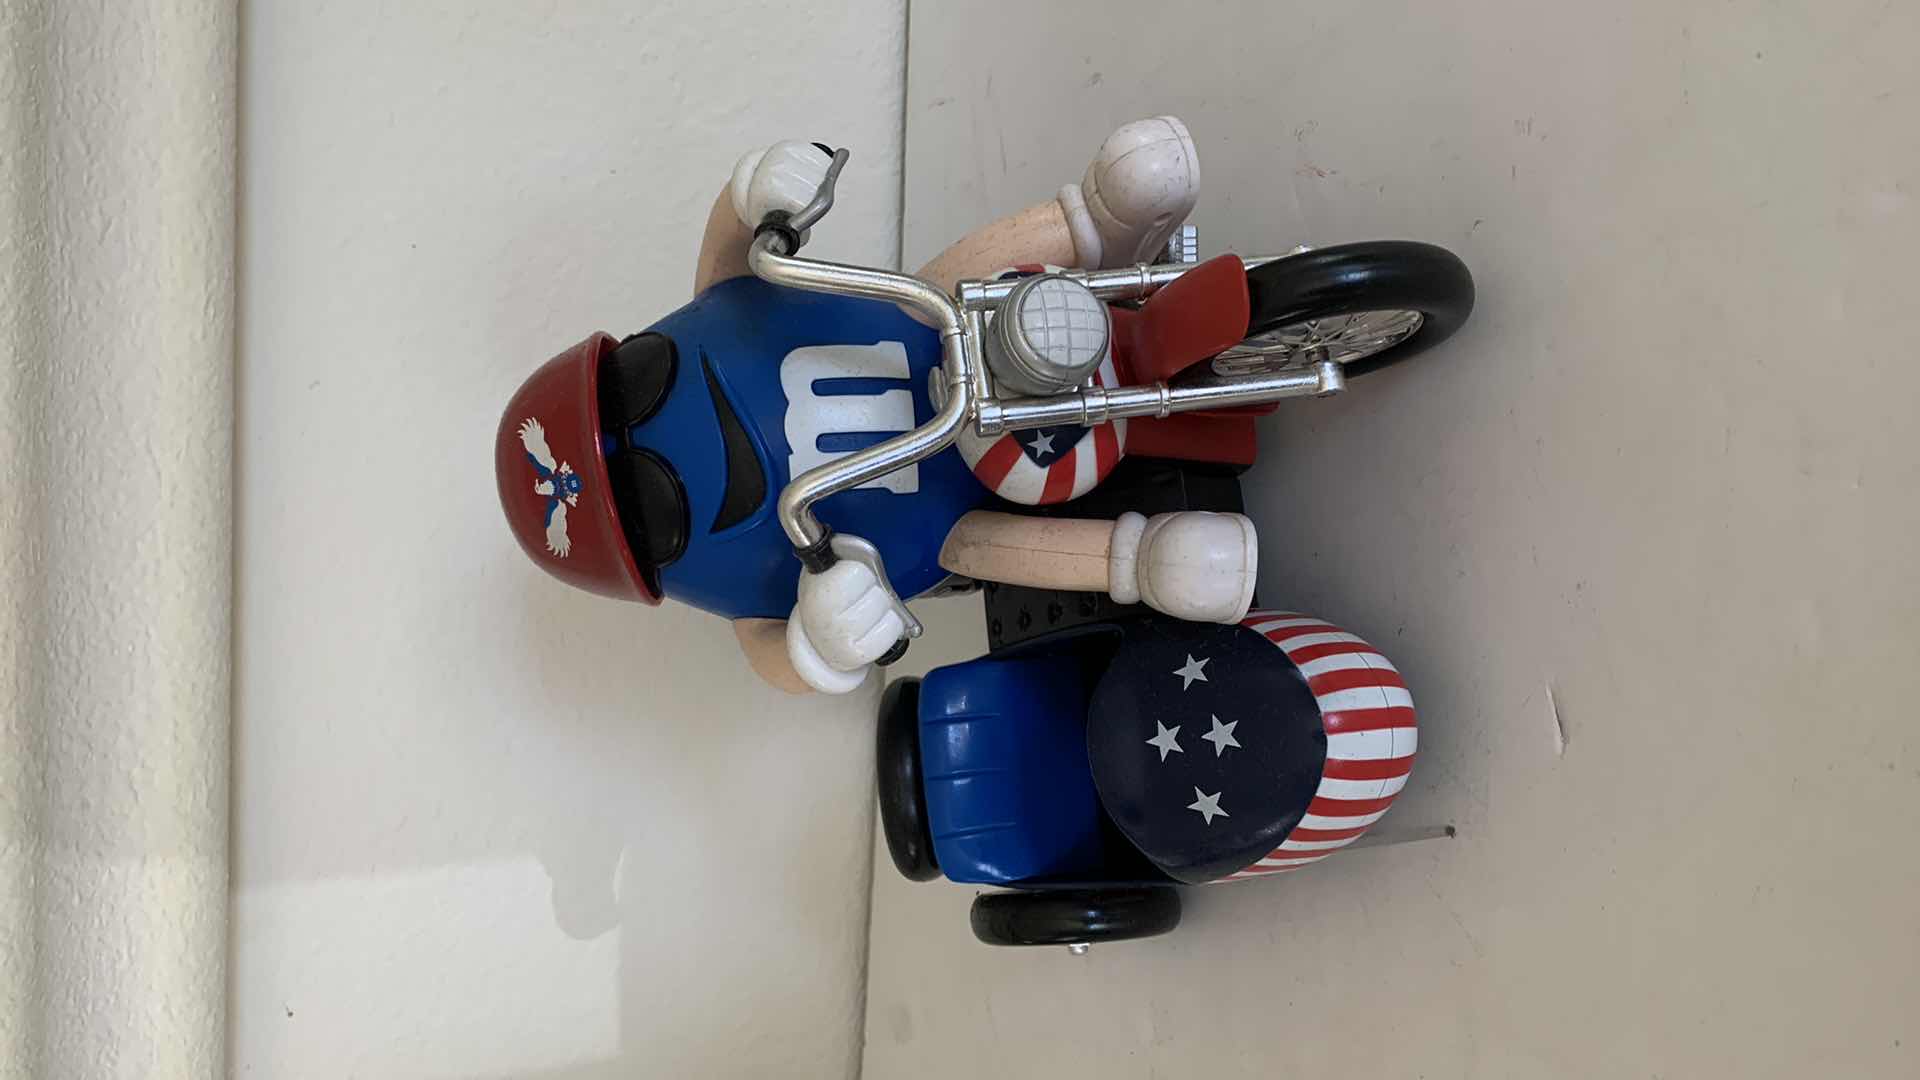 Photo 4 of M & Ms BLUE IN RED WHITE AND BLUE CHOPPER W. SIDE CAR COLLECTIBLE CANDY DISPENSER.